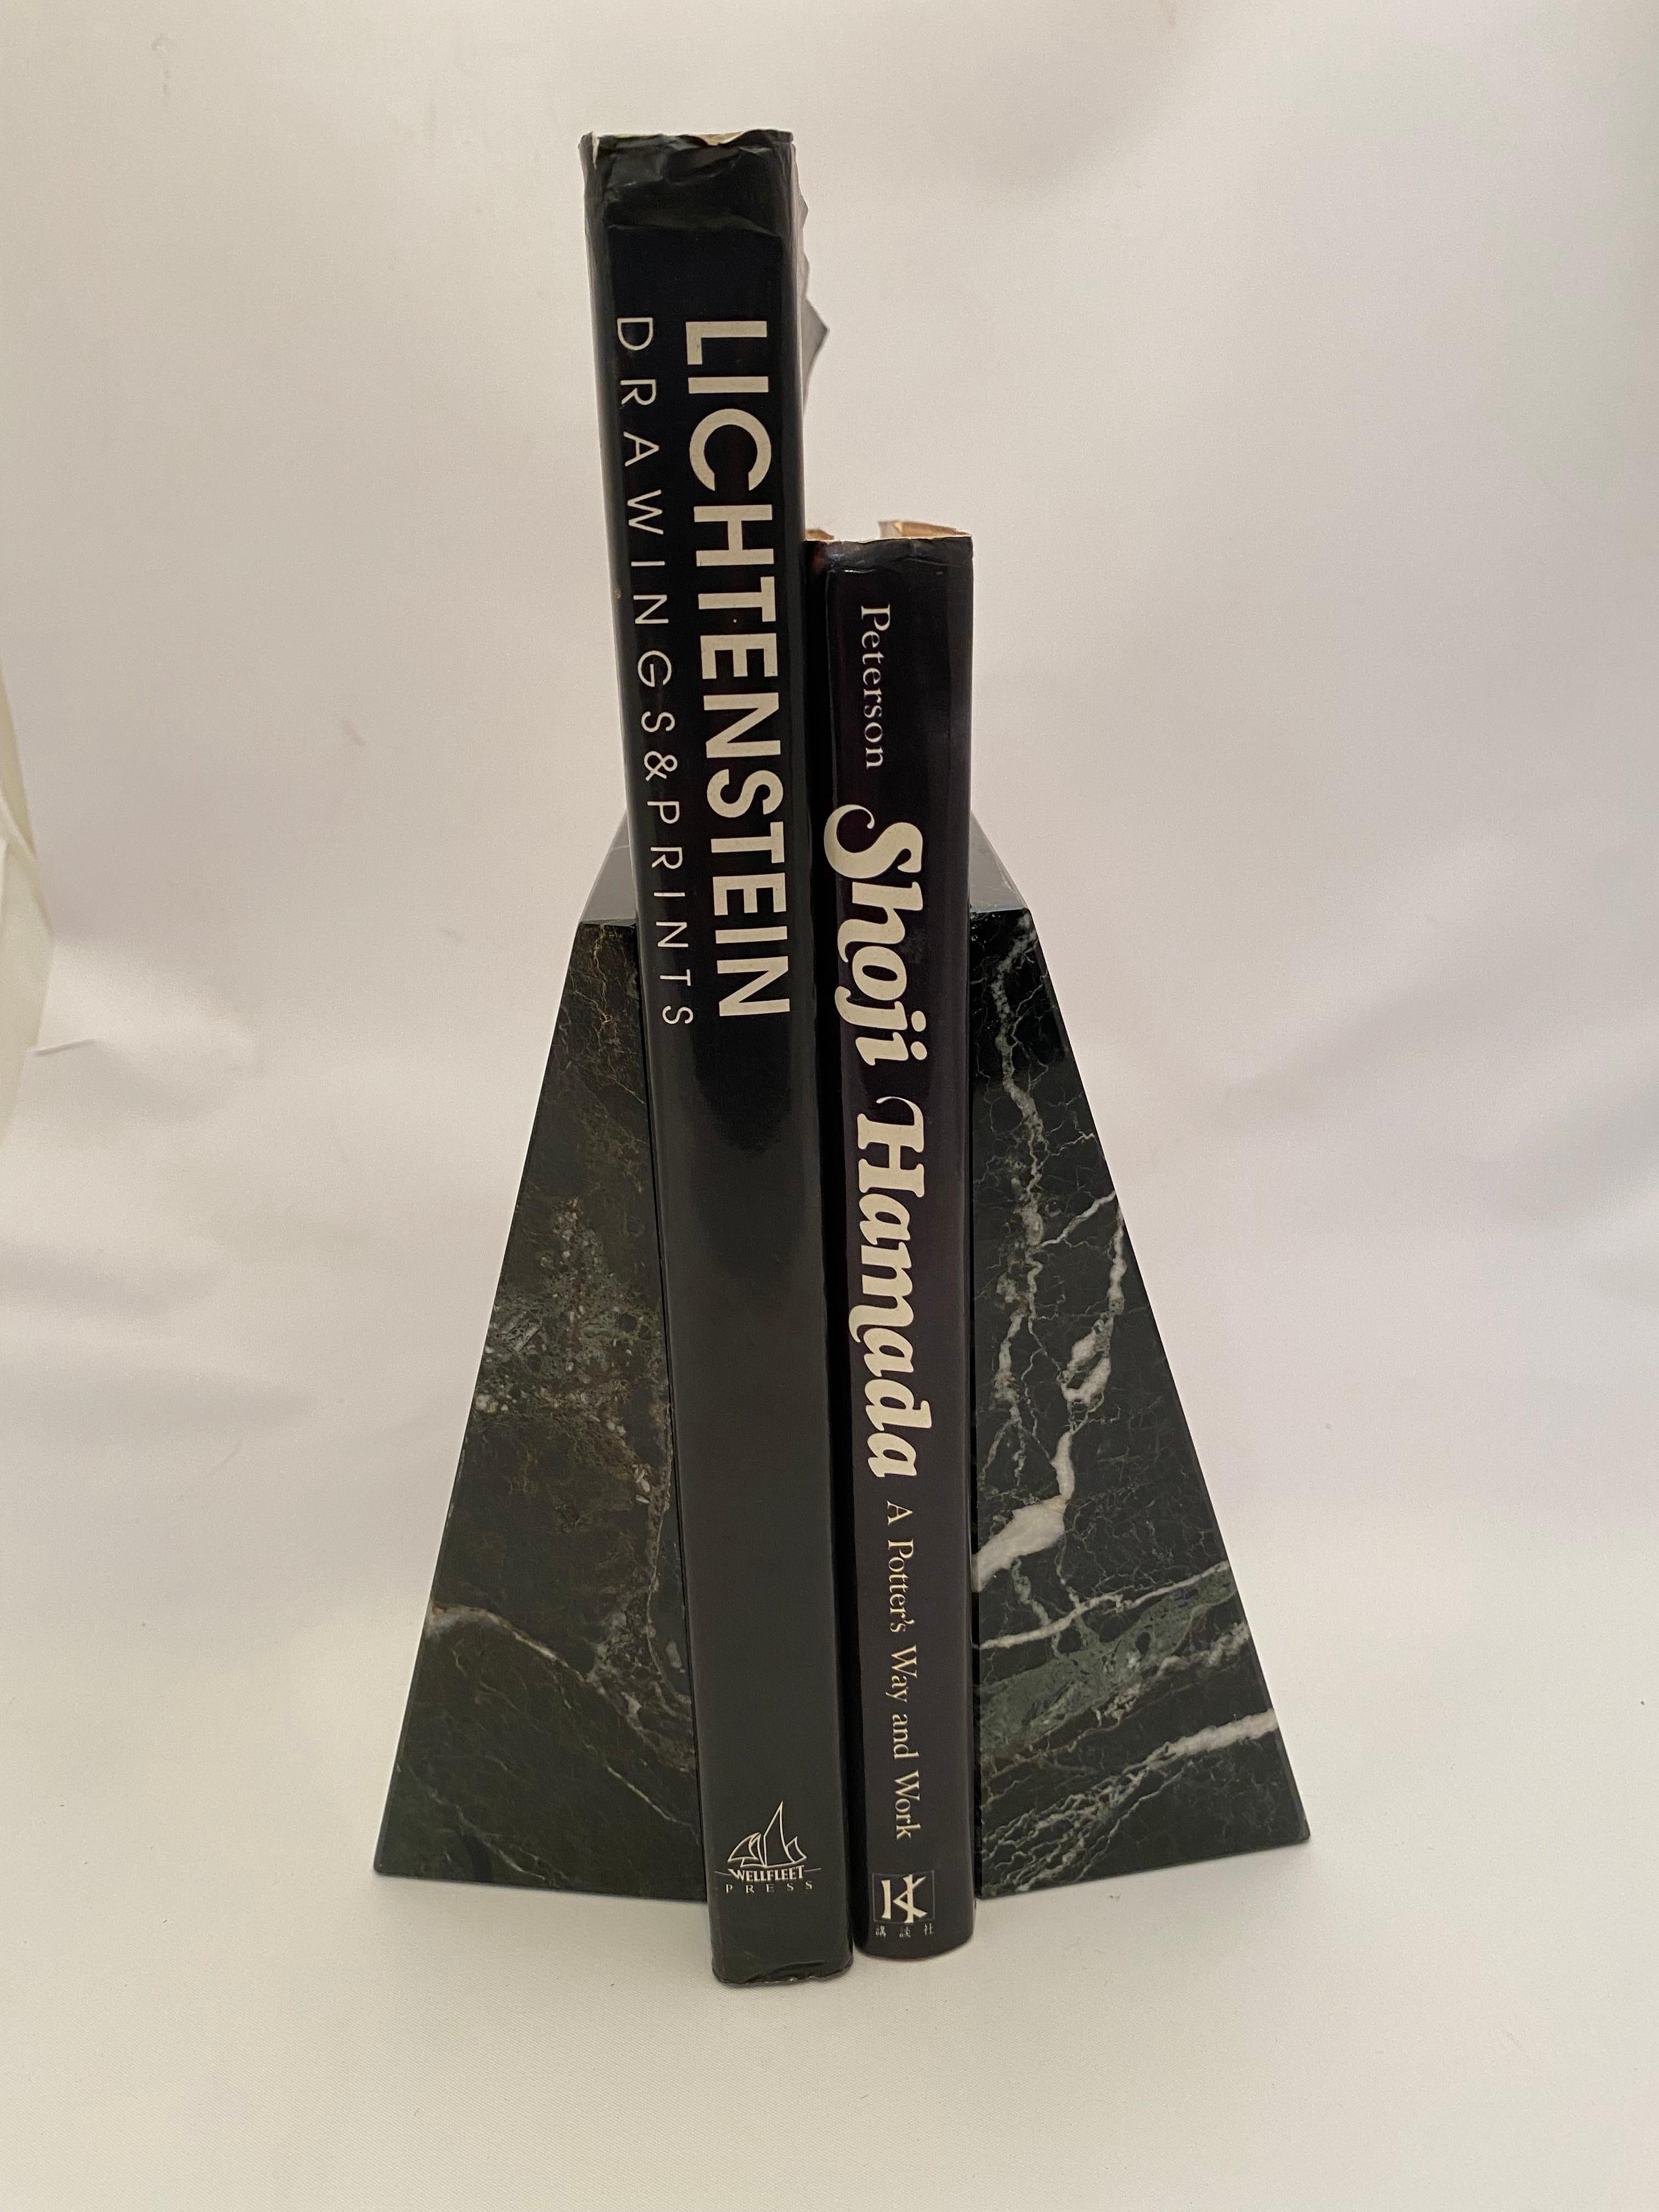 A pair of polished dark green (almost black) marble bookends. Austere wedge shape with gray and white veining. Circa 1980-90. Good condition with no major issues like chips or cracks. Minor scratches and wear commensurate with age and